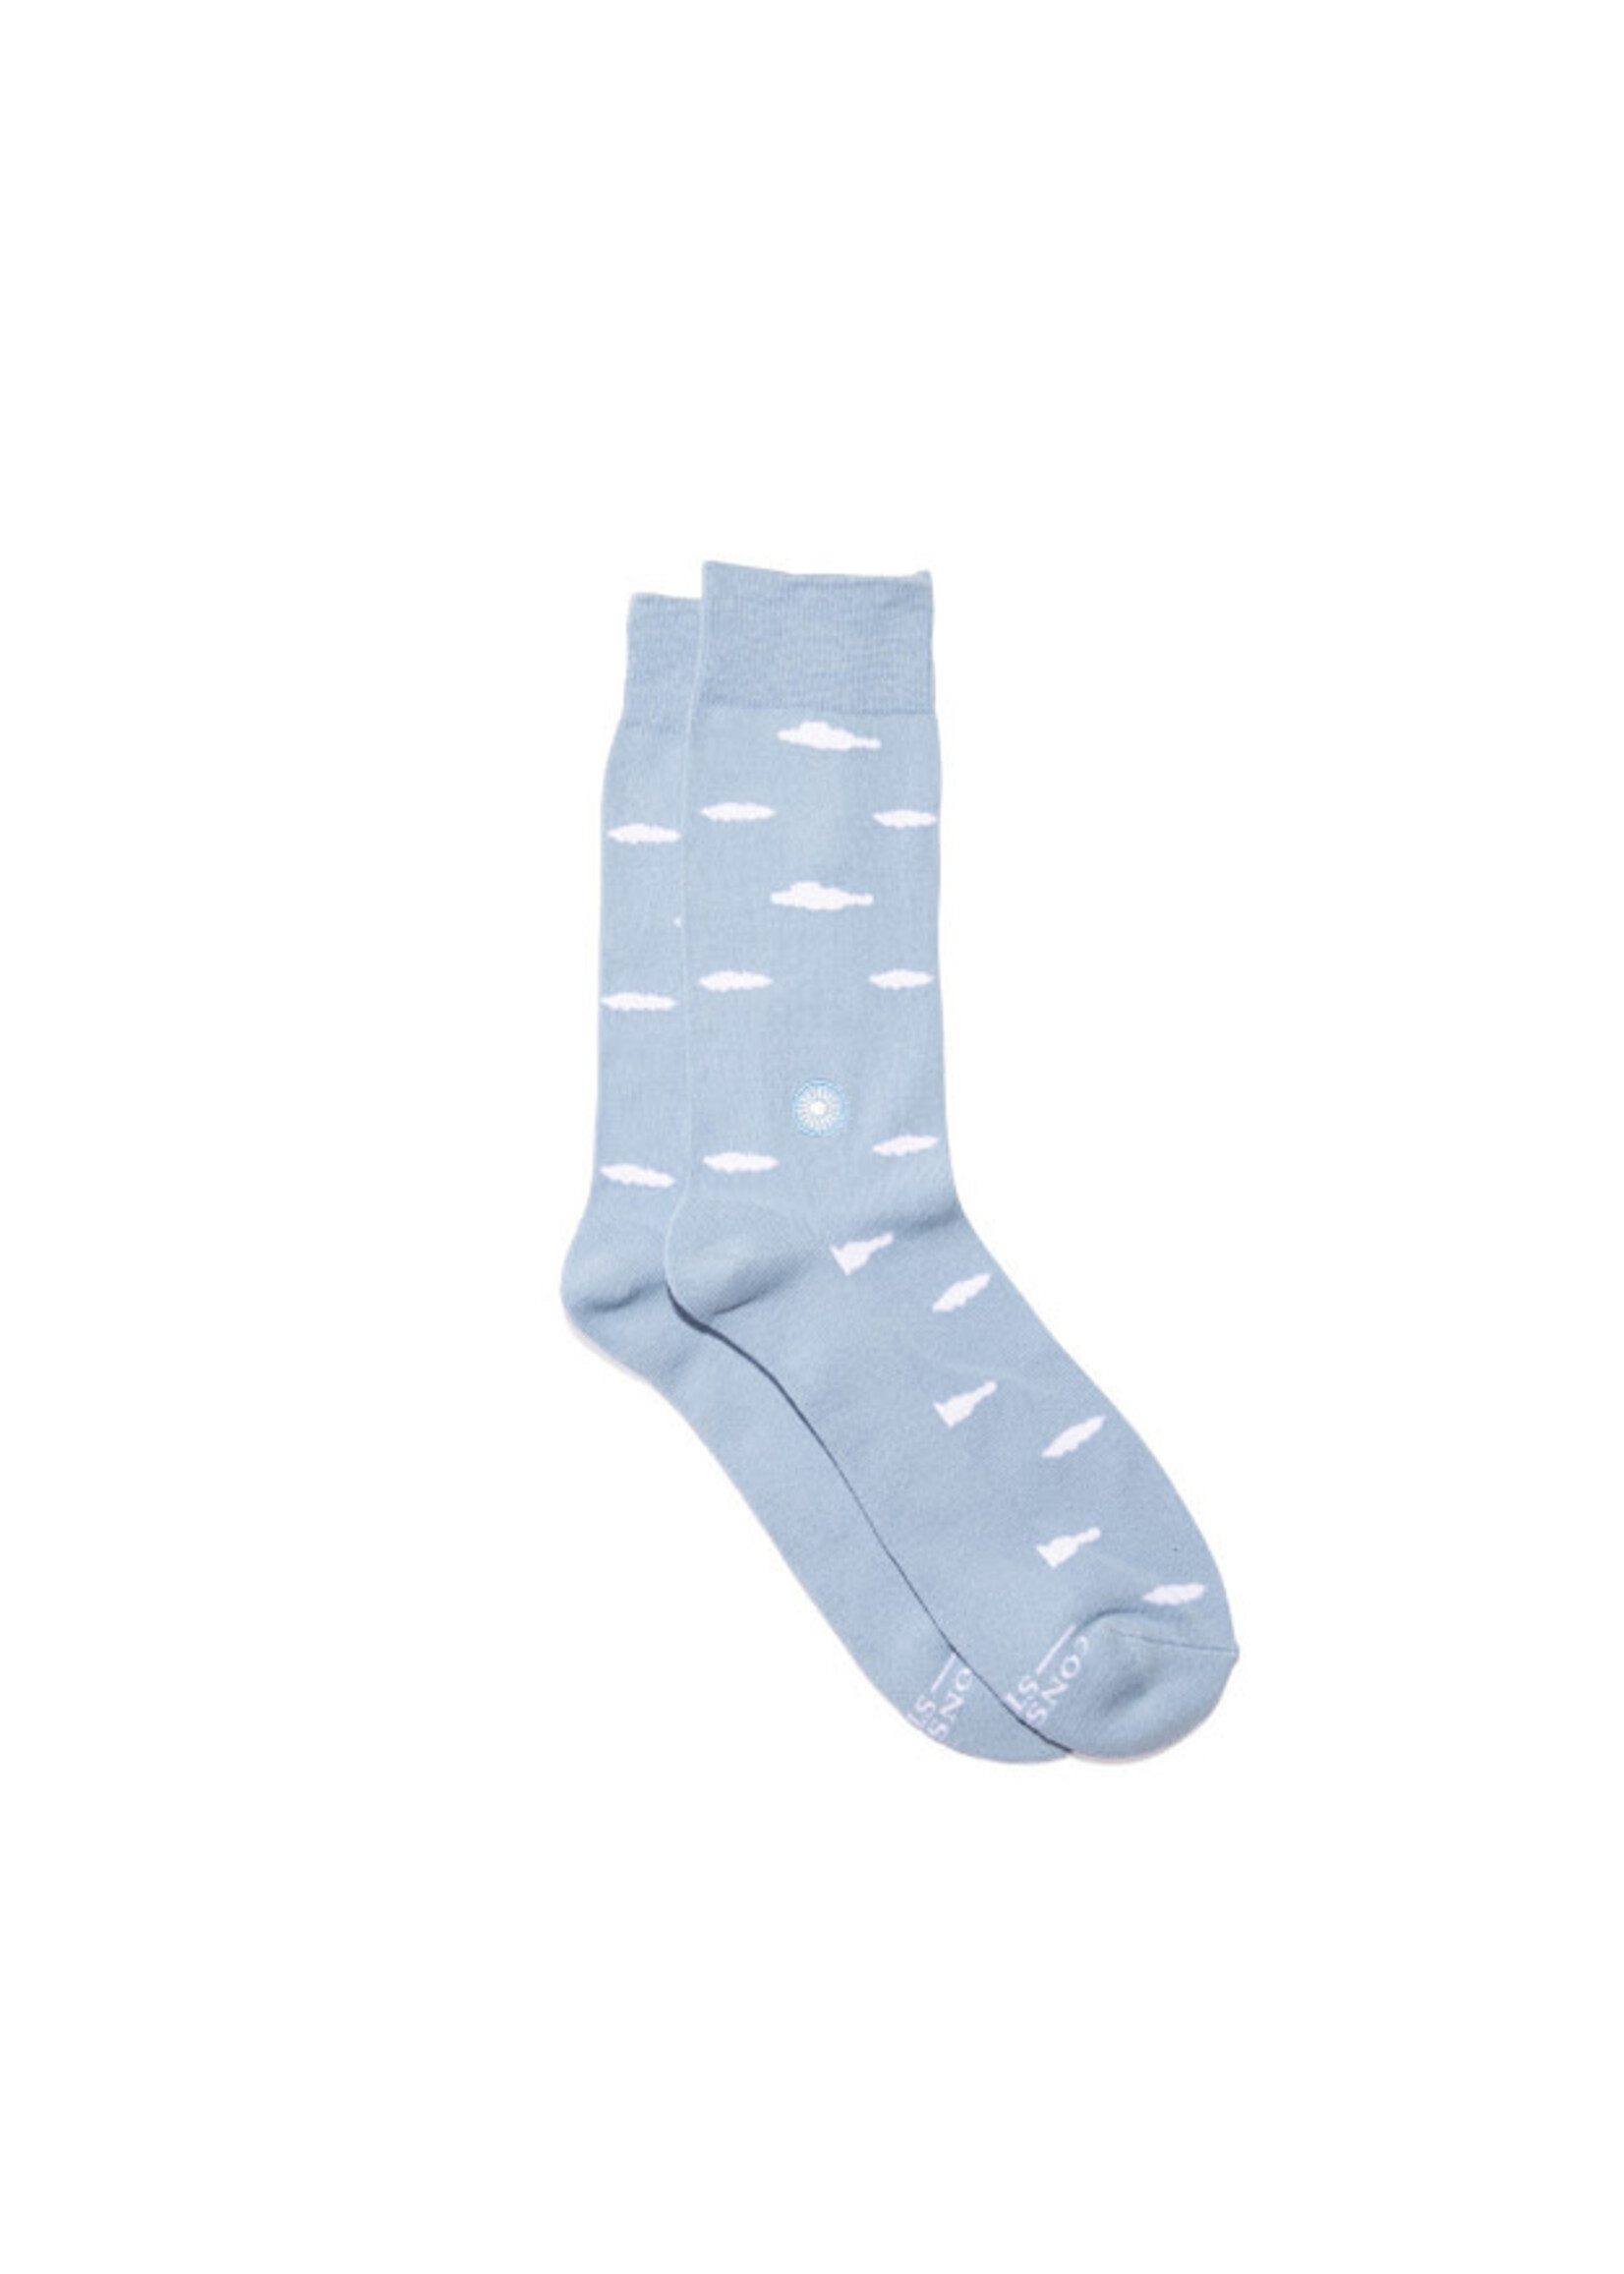 Socks That Support Mental Health -  Clouds